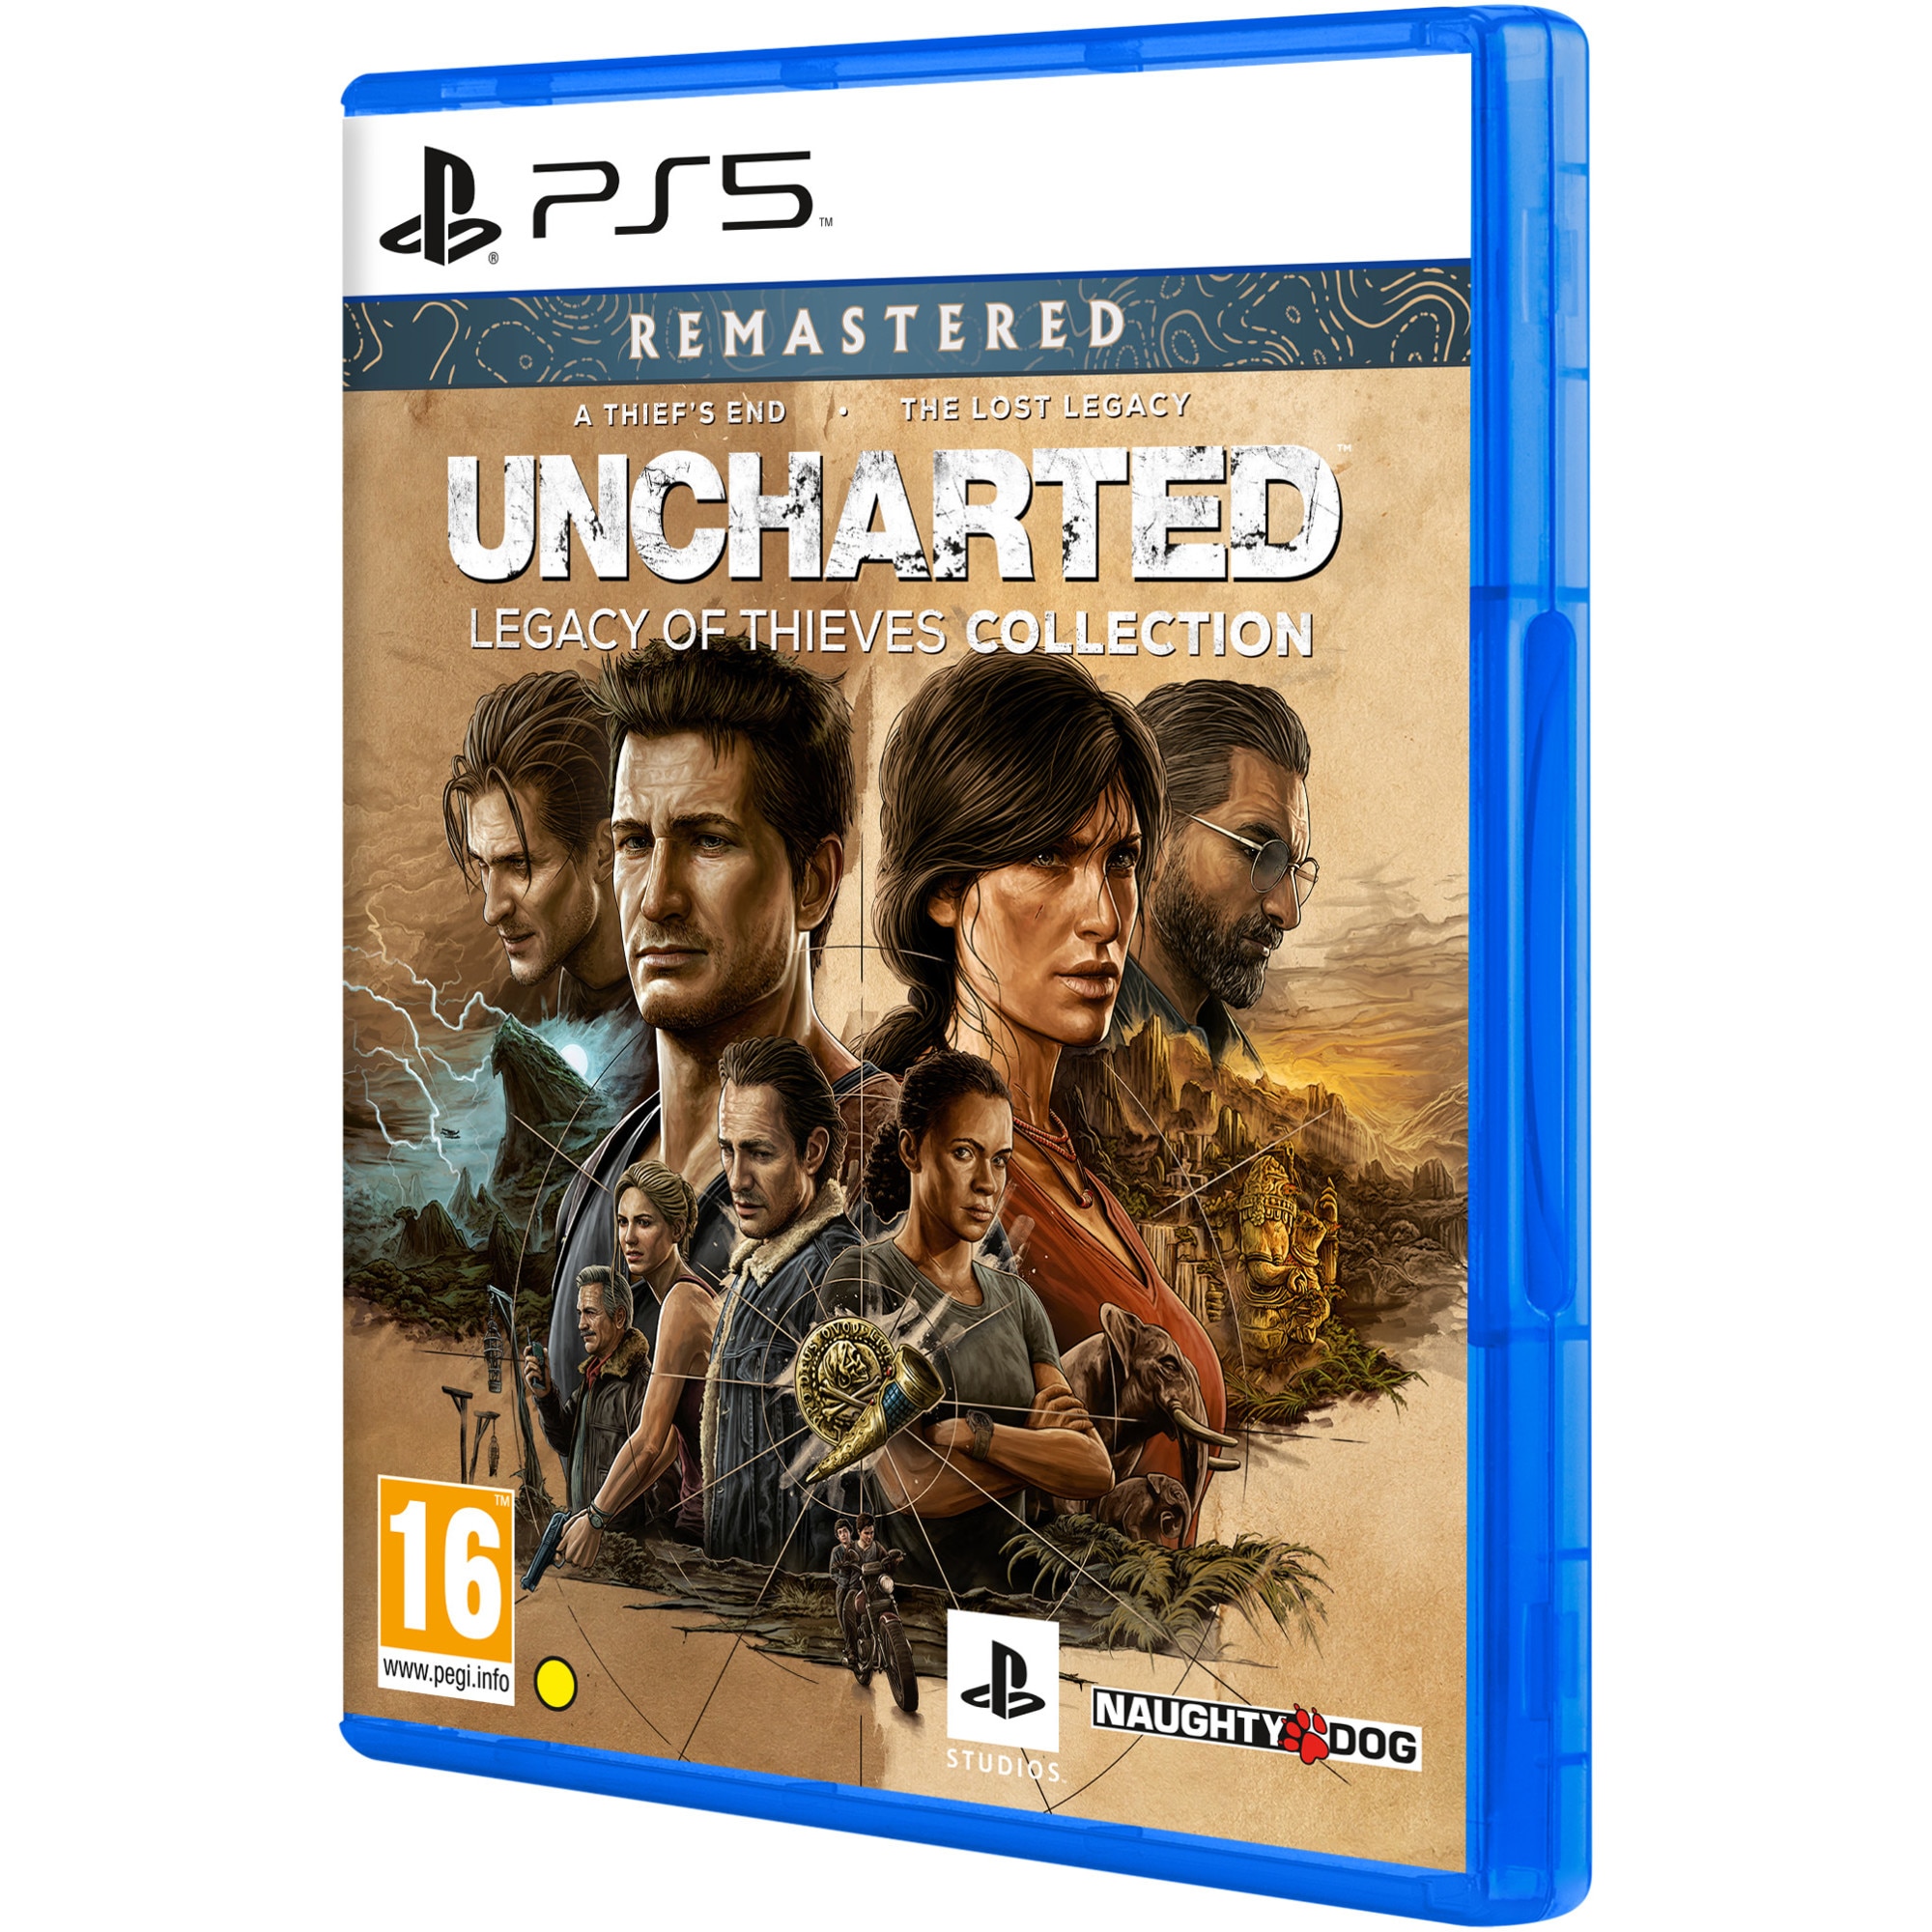 Купить thief collection купить. Uncharted Legacy of Thieves collection ps5. Uncharted ps5 диск. Uncharted Legacy of Thieves collection ps5 обложка. Uncharted пс5.